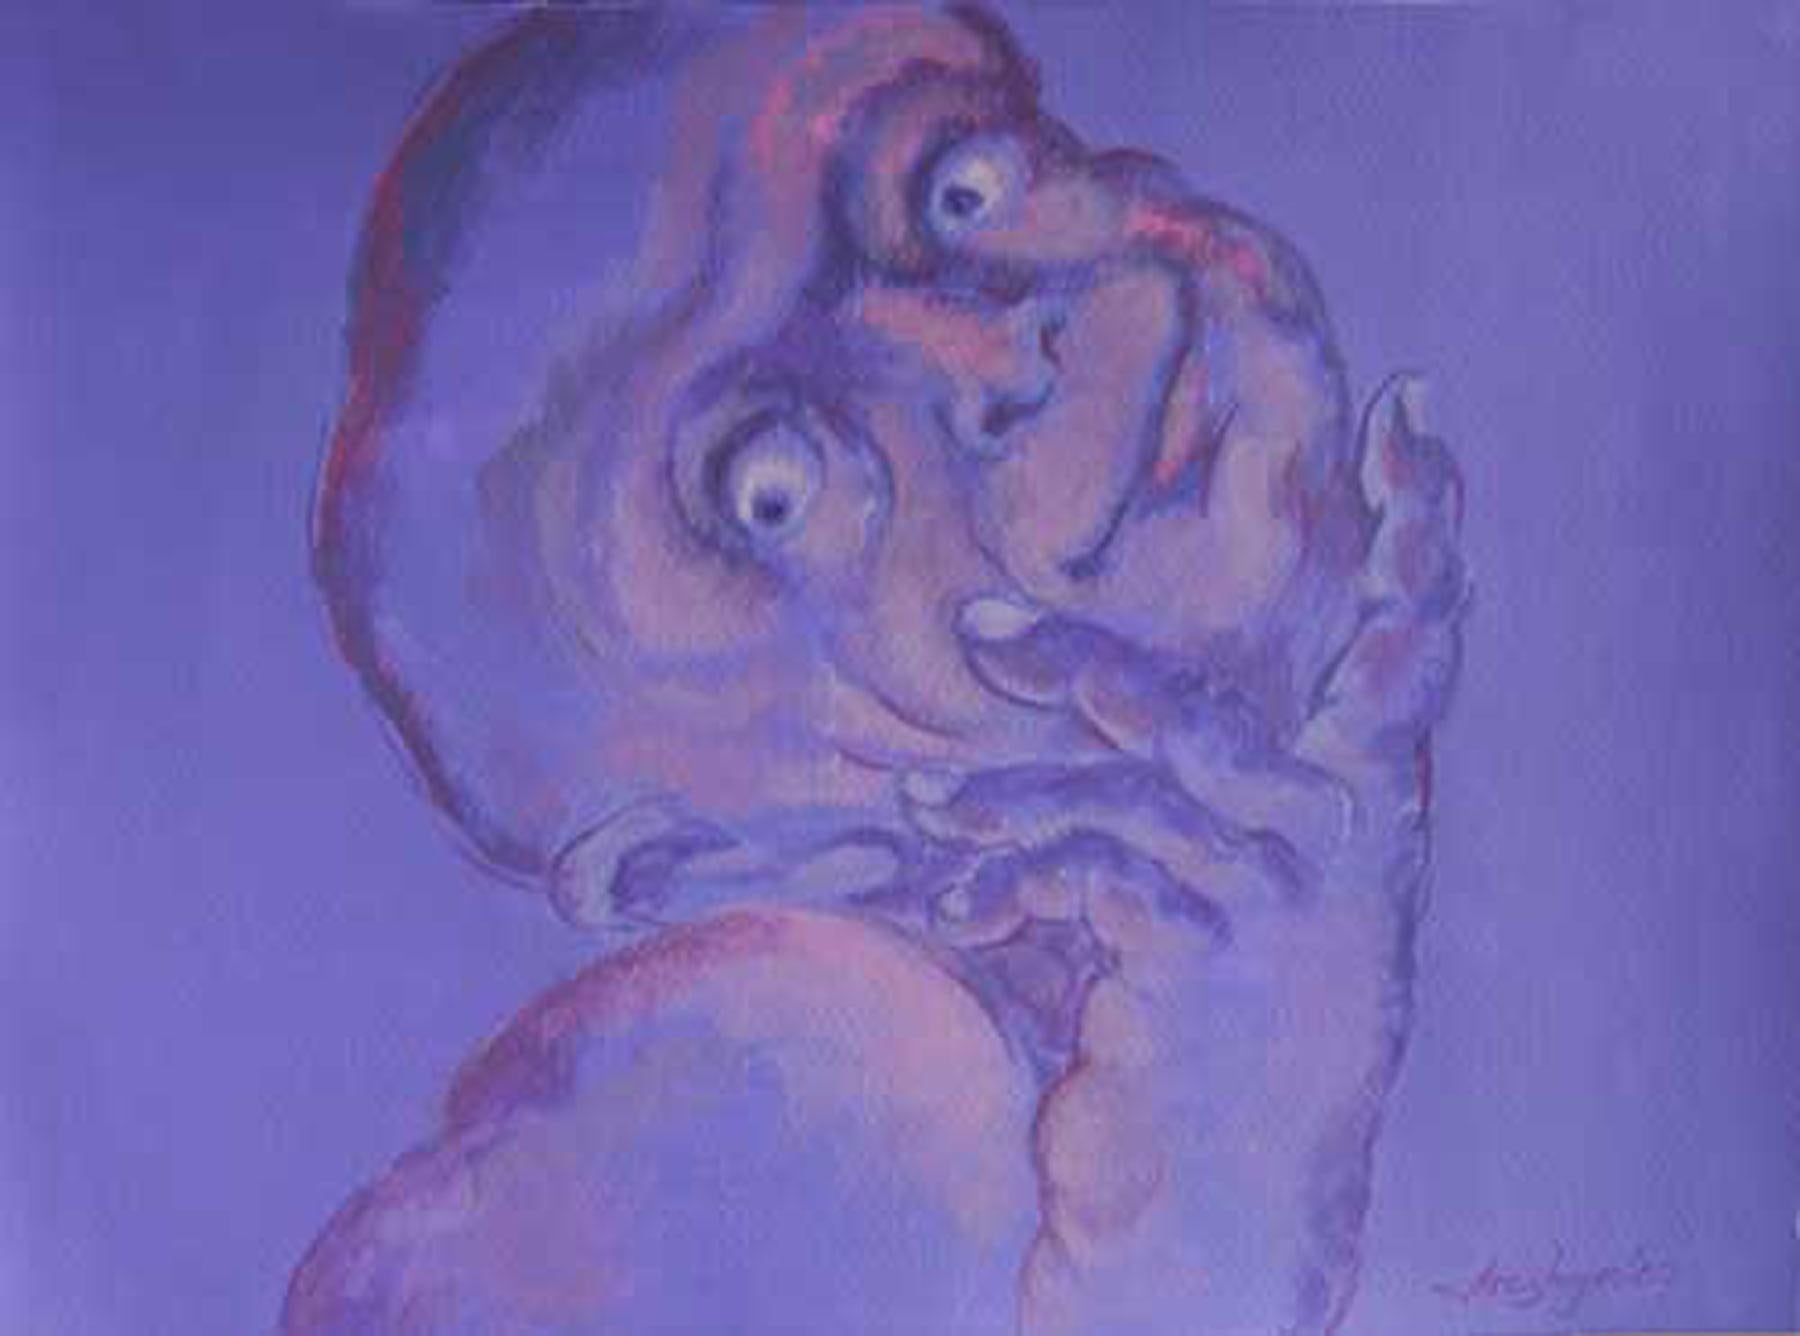 Human Form, Multi Faceted, Acrylic Painting, Blue, Violet, Red colors "In Stock"